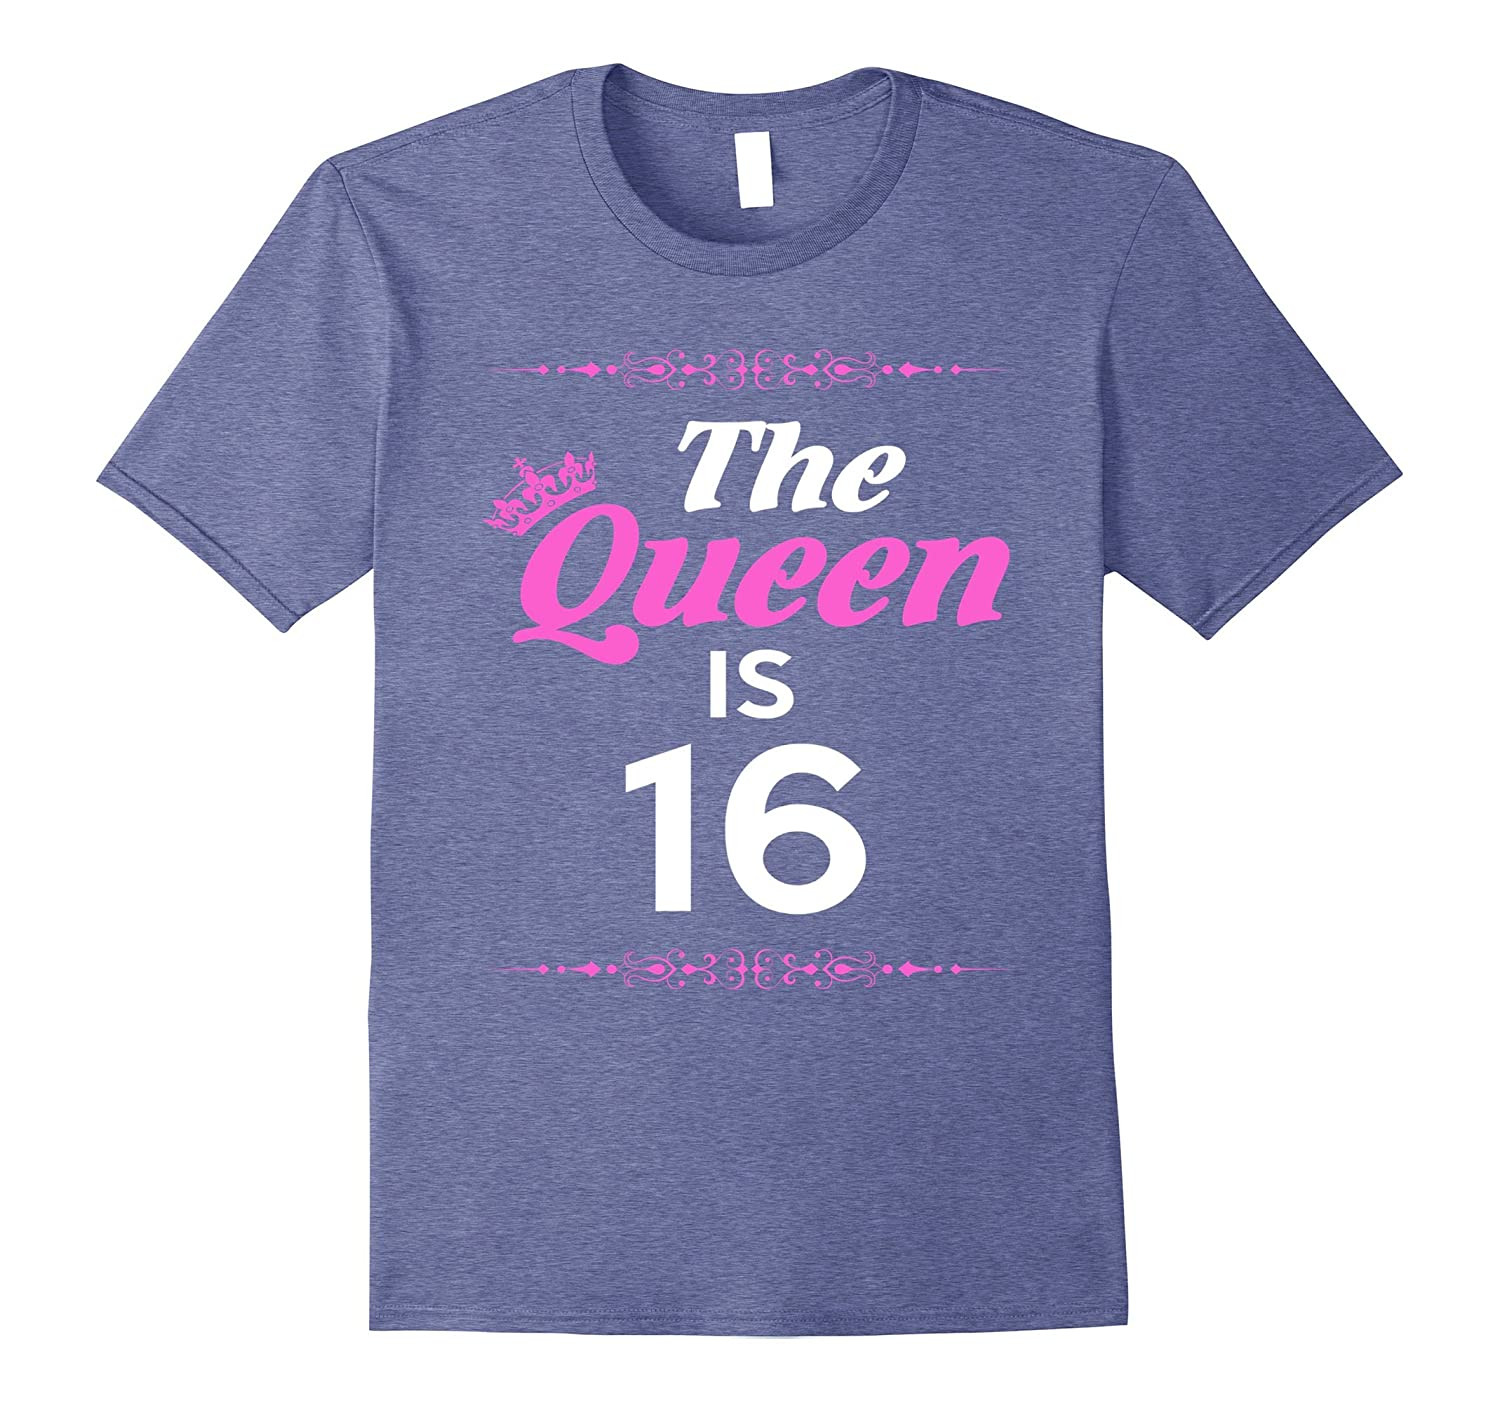 Birthday Gift Ideas For 16 Year Old Girl
 Queen is 16 Year Old 16th Birthday Gift Ideas for her